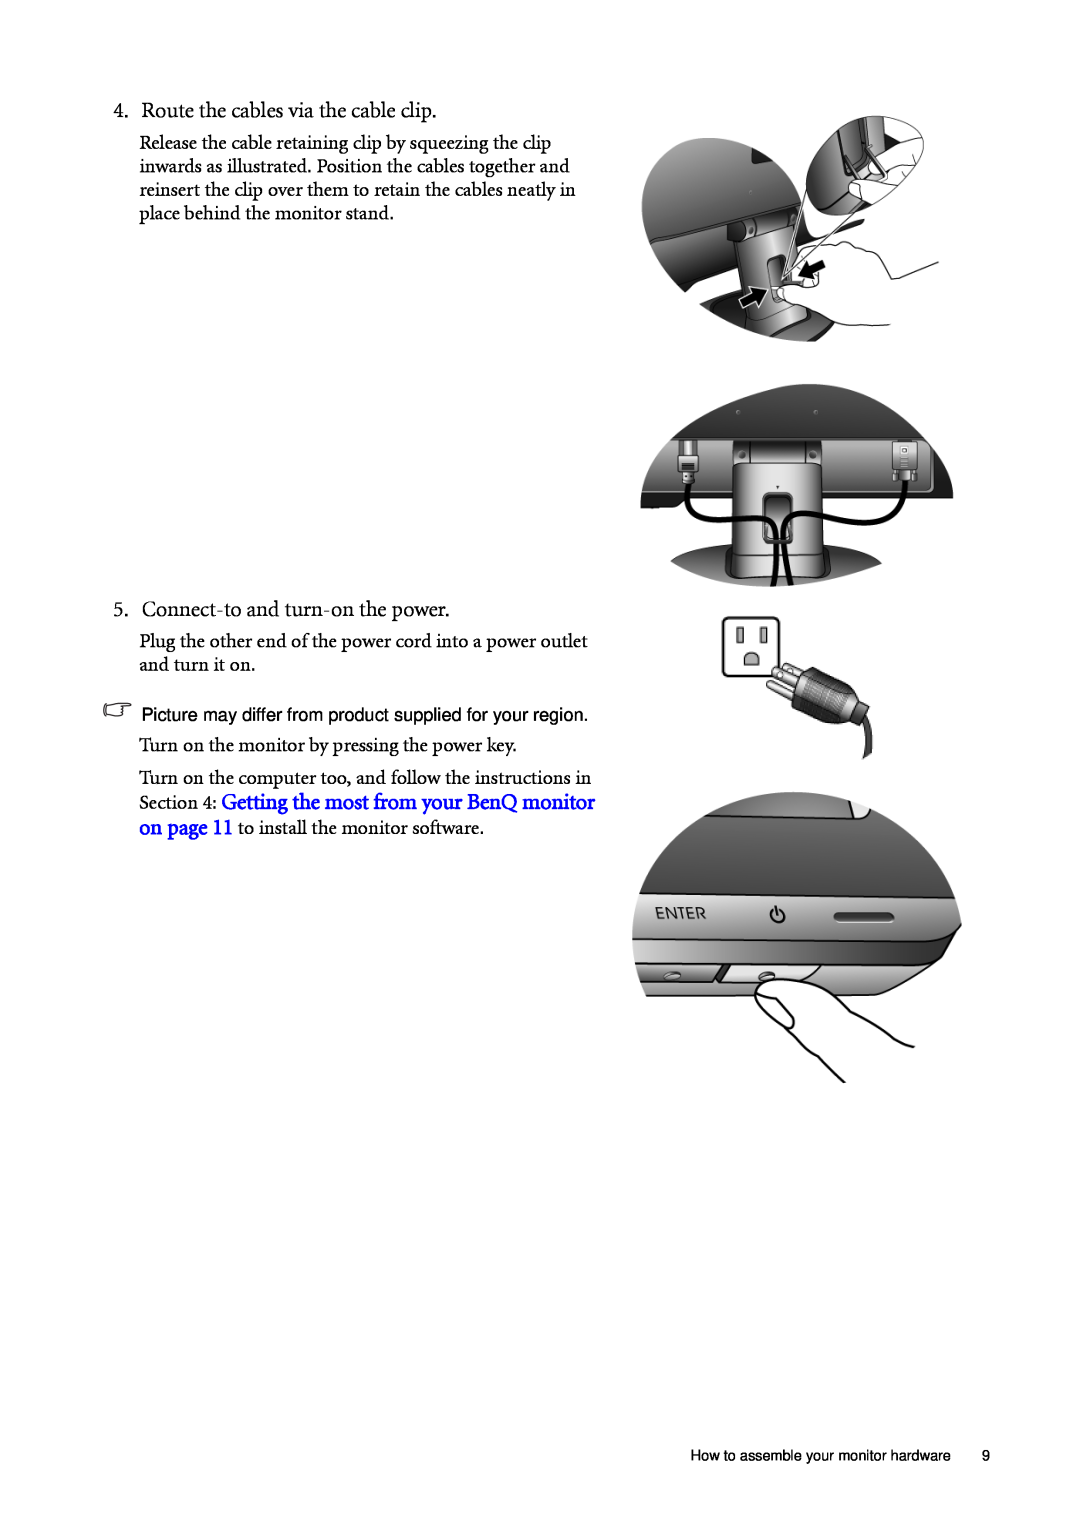 BenQ G920WL, G920WAL user manual Route the cables via the cable clip, Connect-to and turn-on the power 